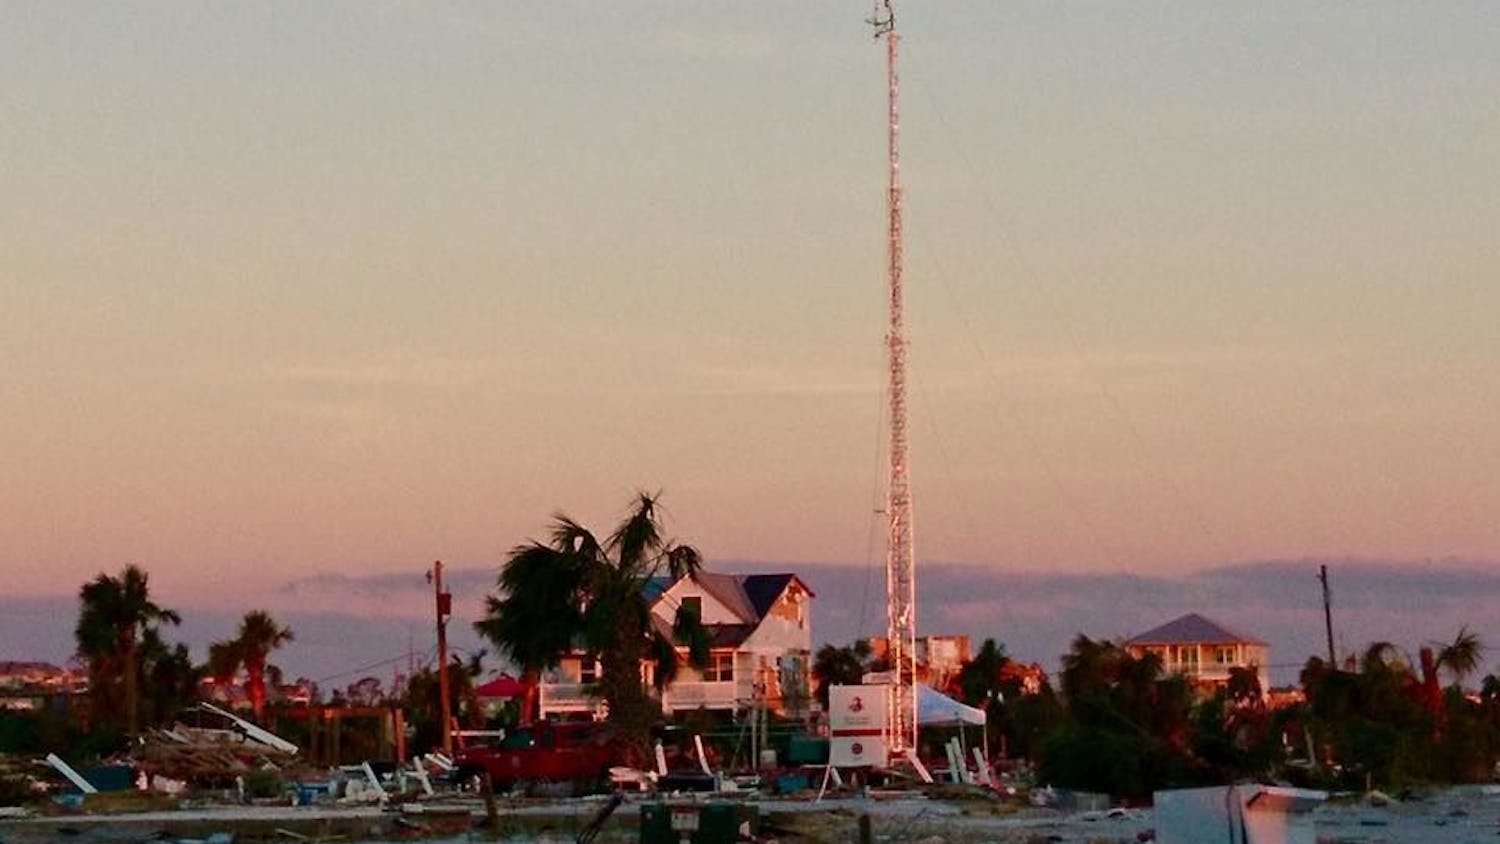 ACFR’s radio communications team set up a 100-foot radio tower in Mexico Beach to provide communication between rescue teams.